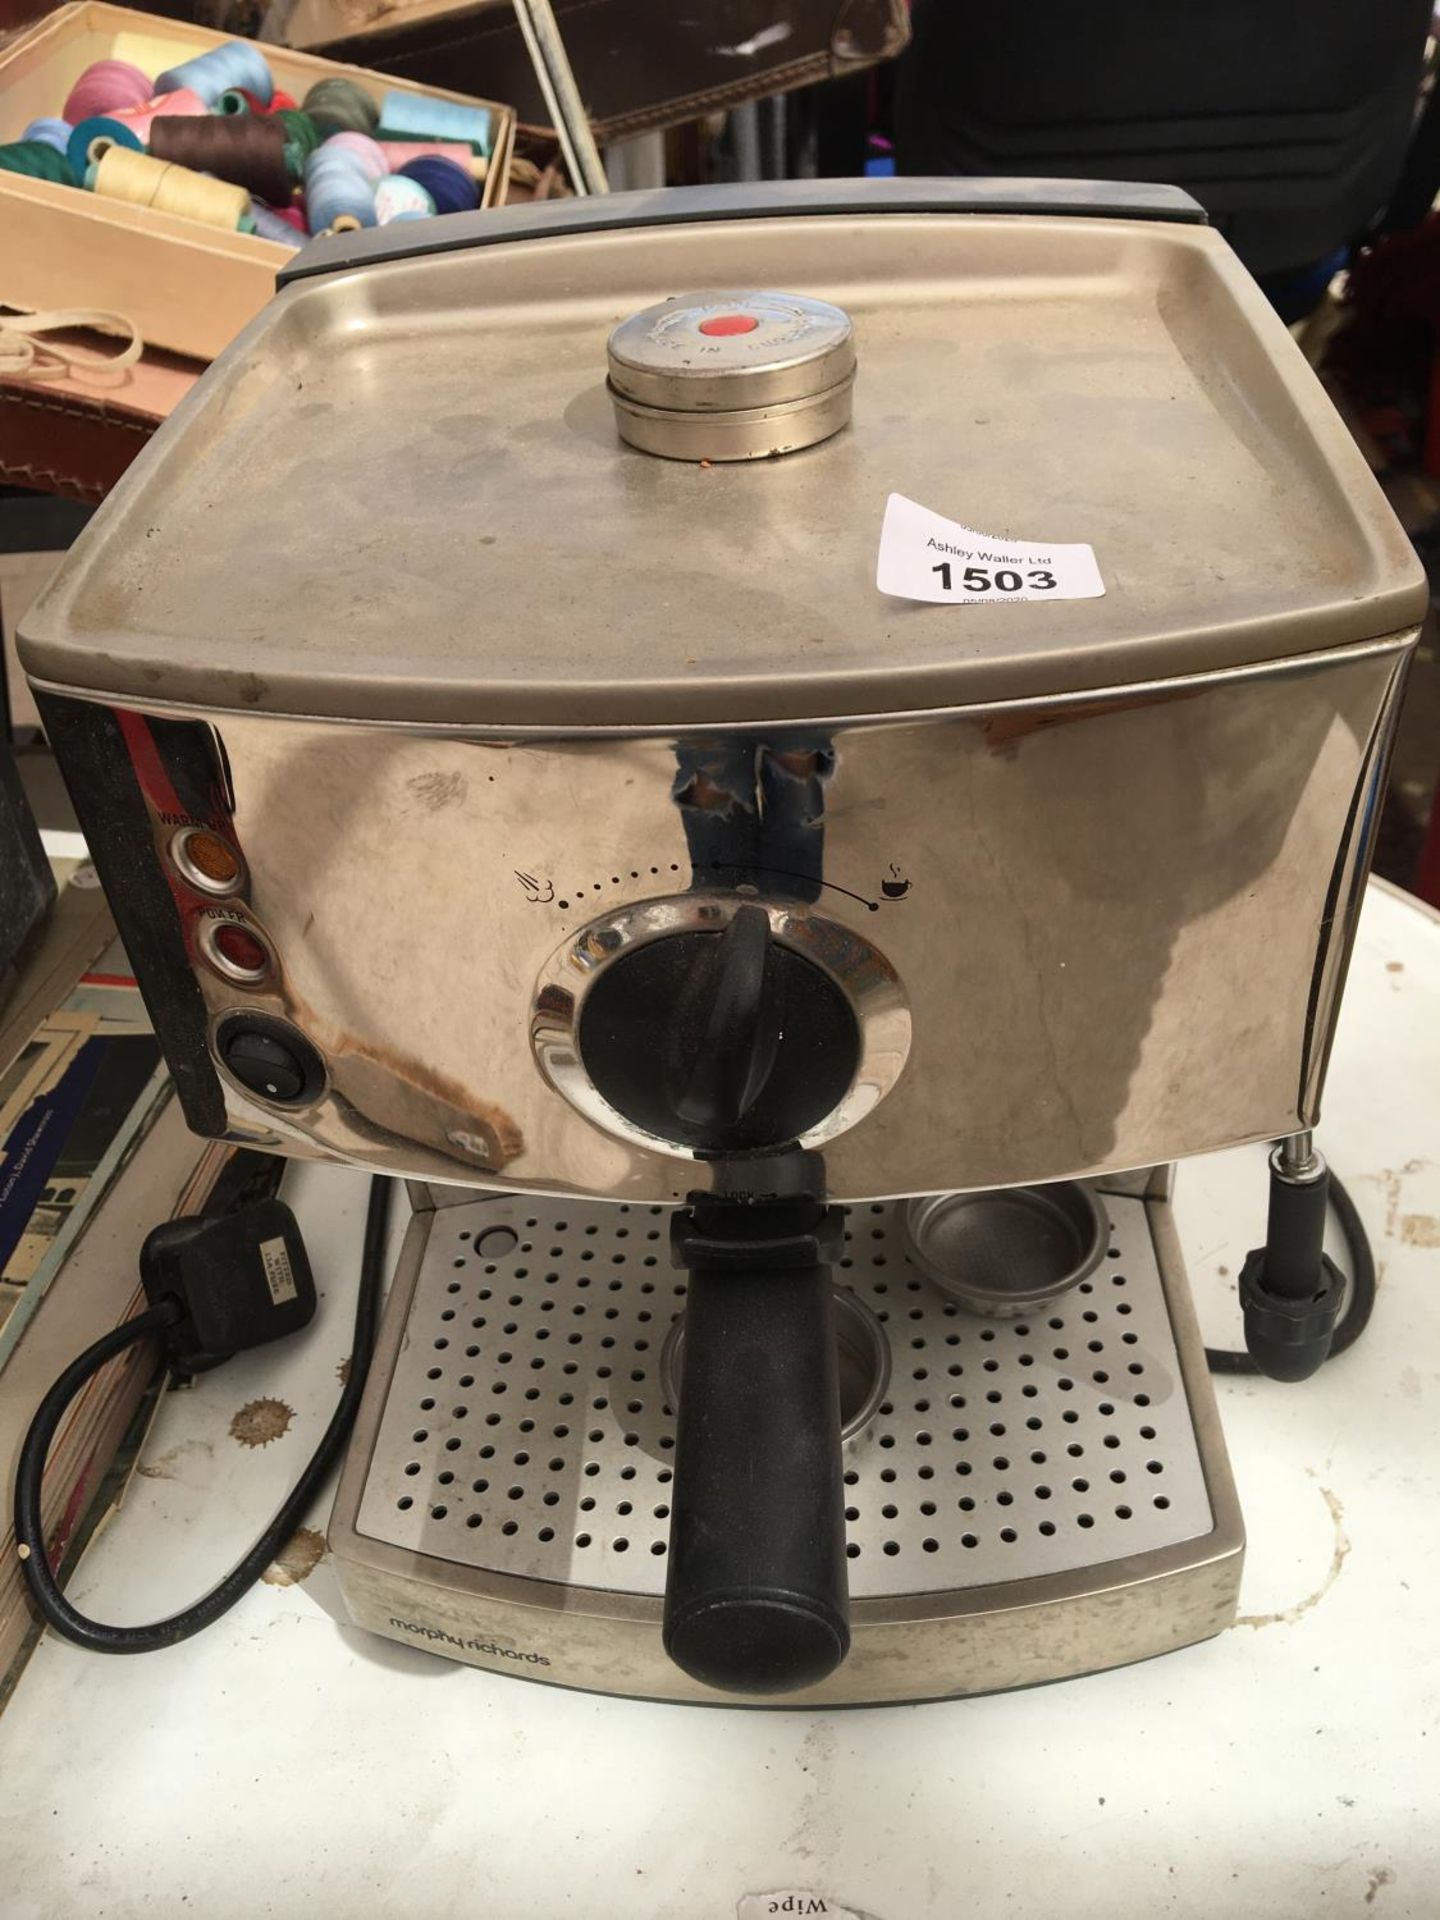 A MORPHY RICHARDS COFFEE MACHINE - Image 2 of 2